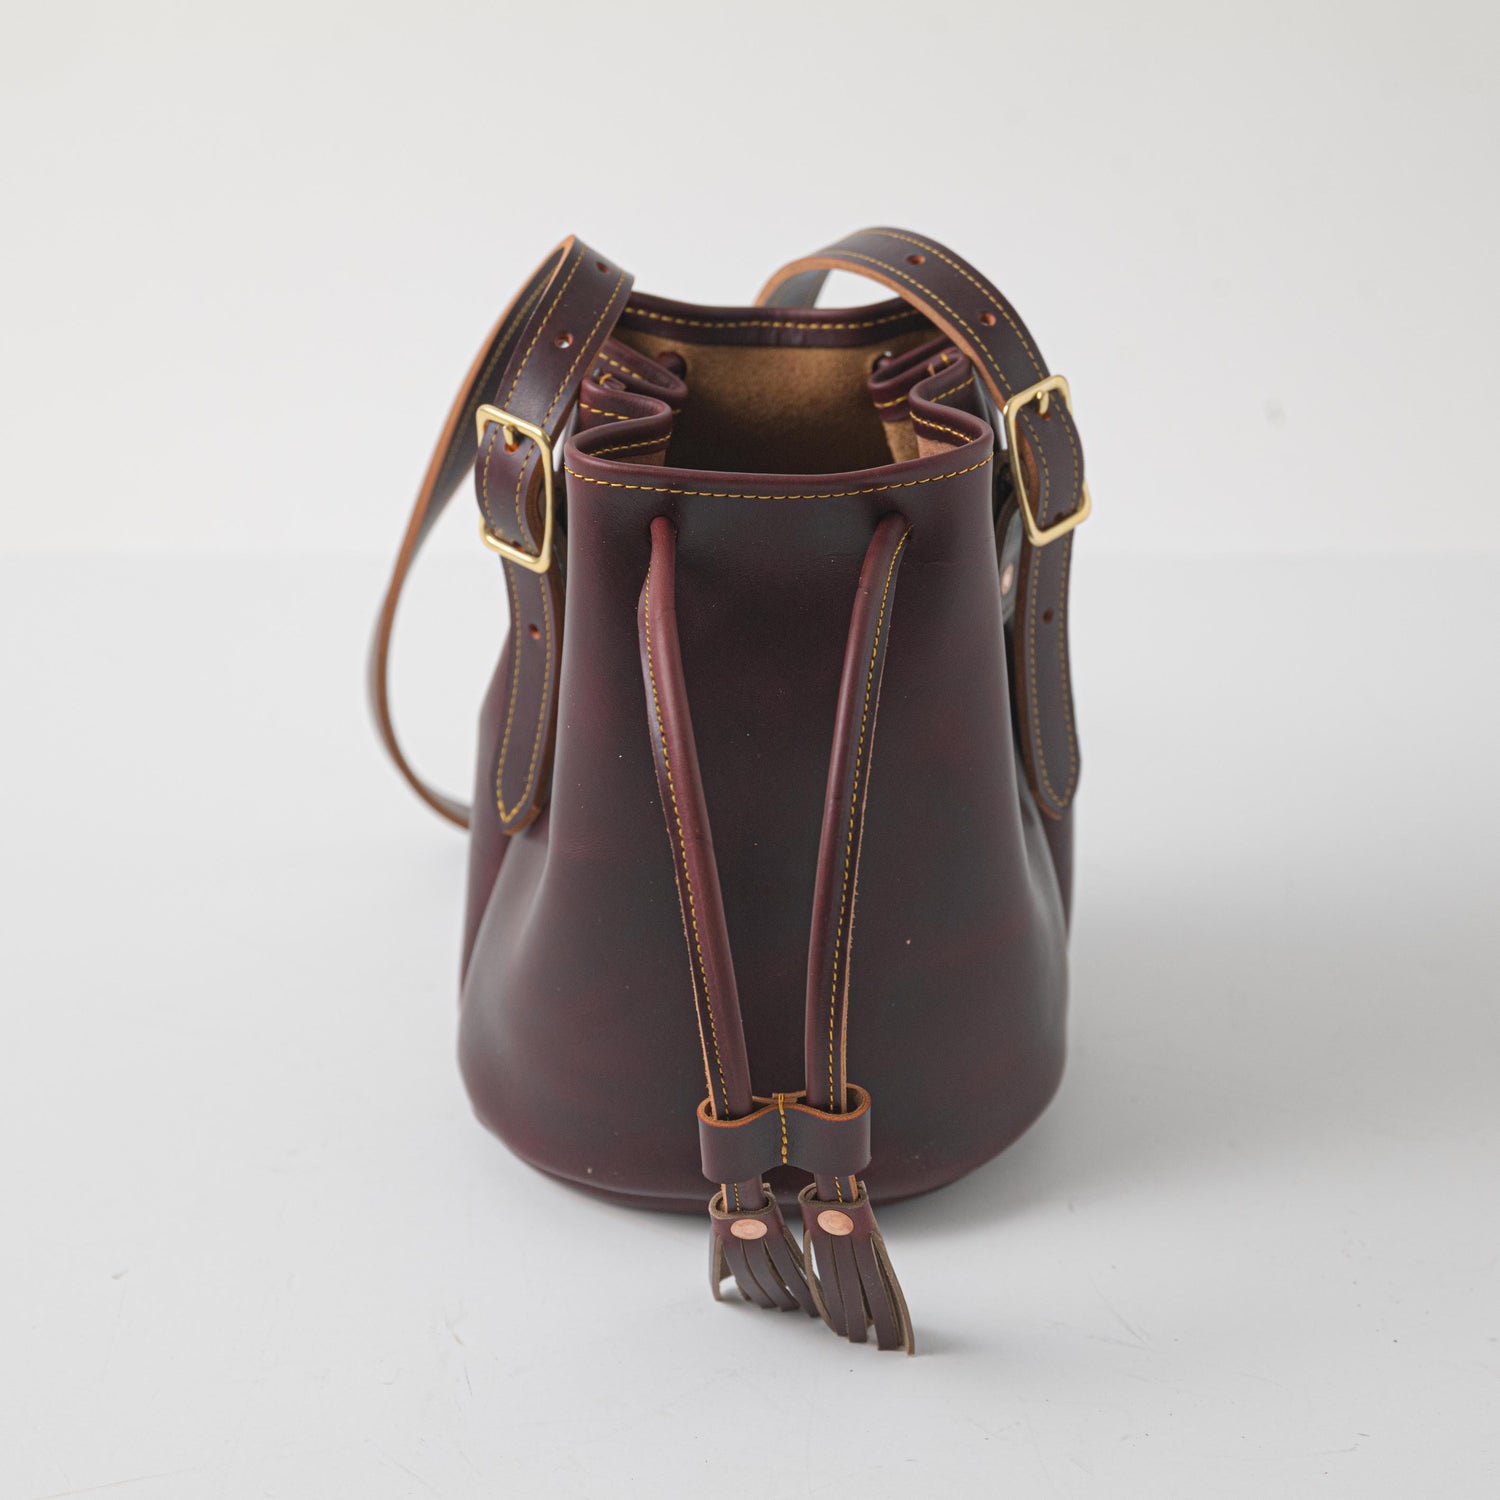  Leather Bucket Bags for Women Crossbody Purses with